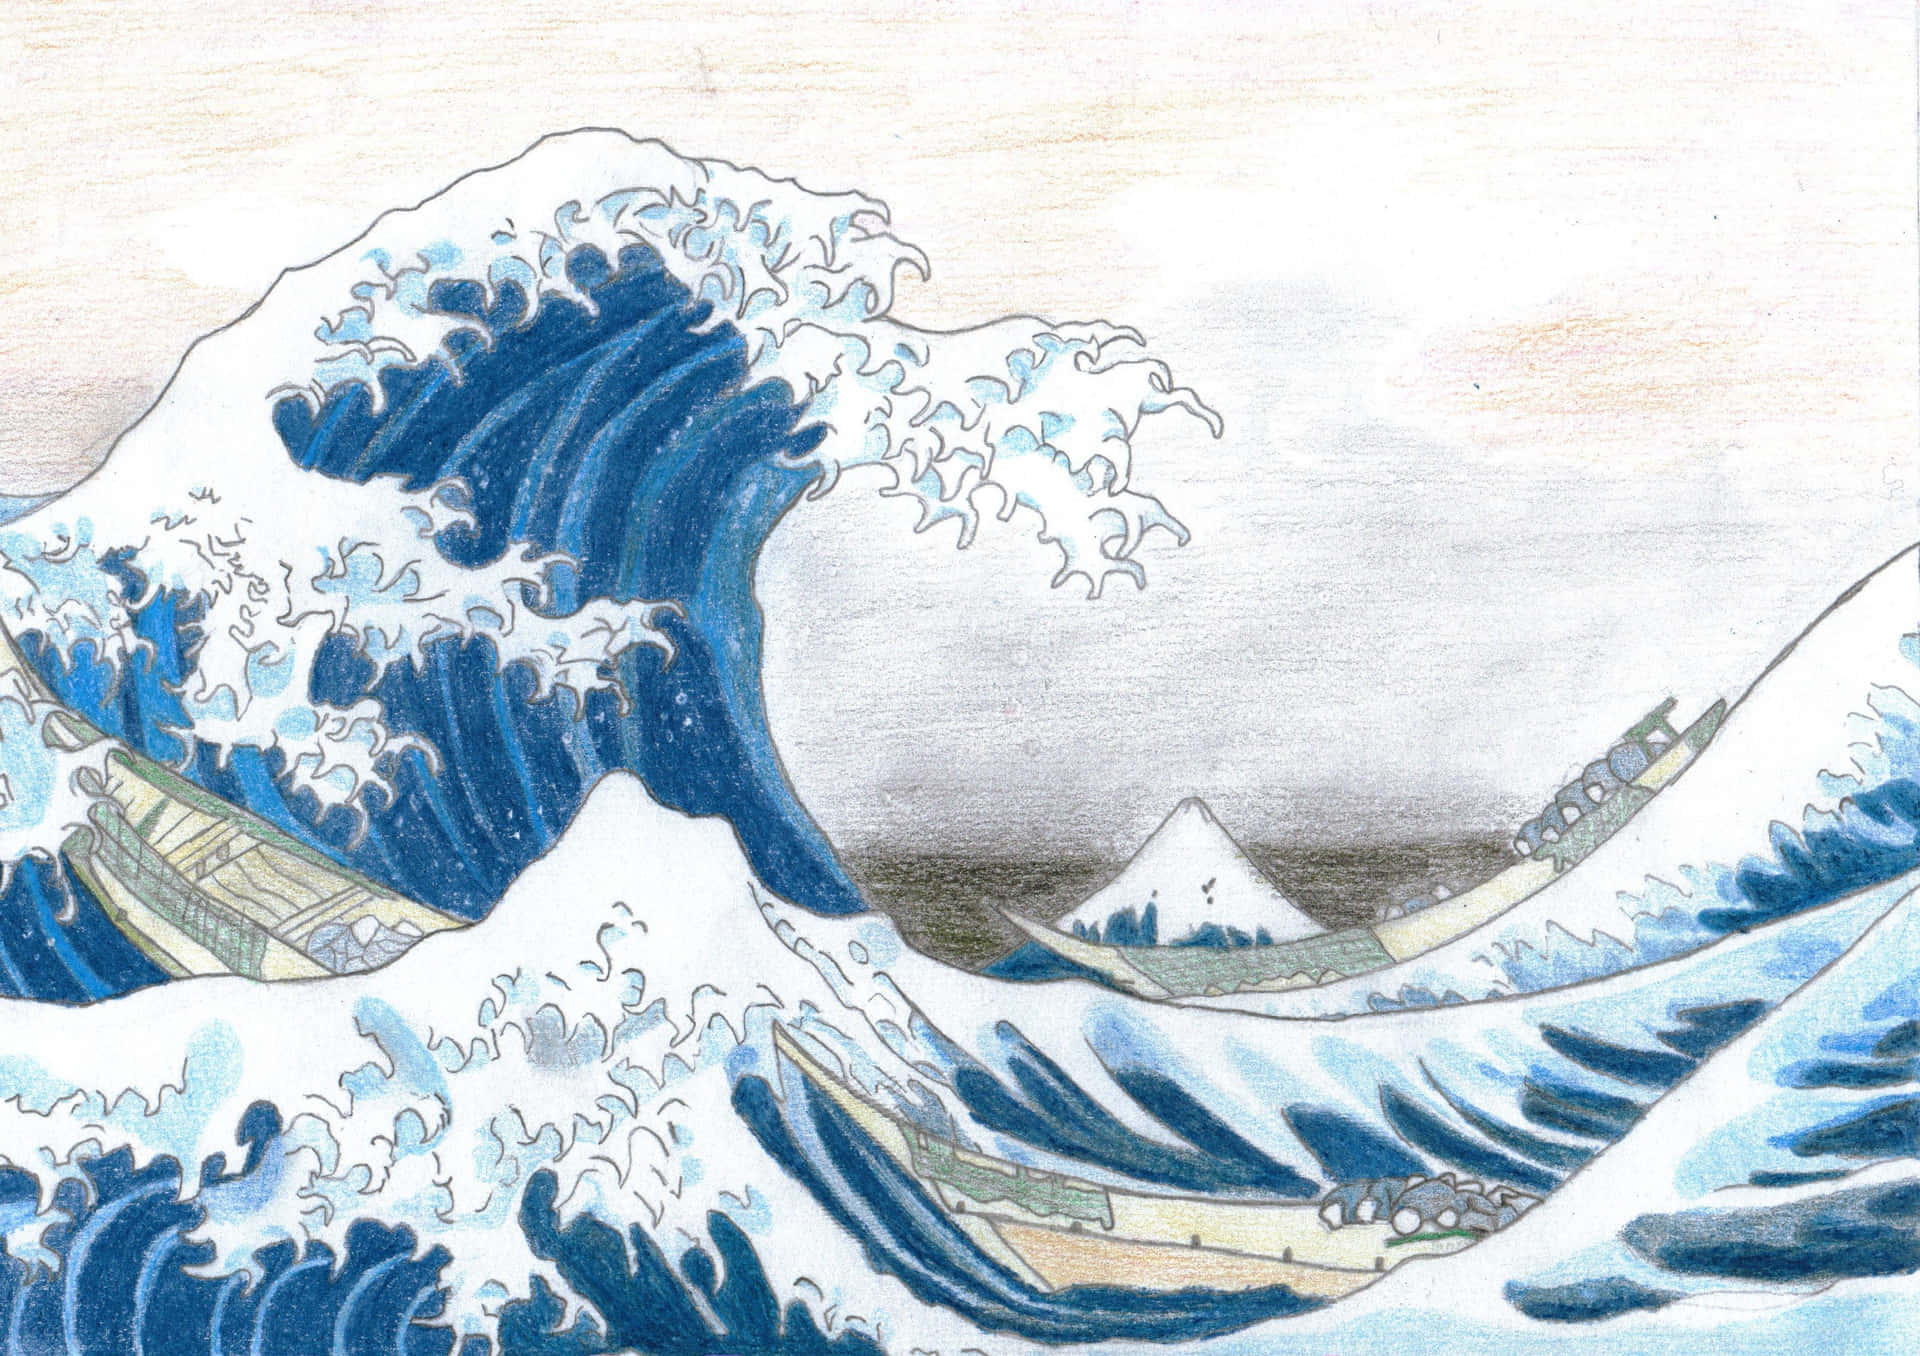 The Great Wave Storm-tossed Sea Wallpaper